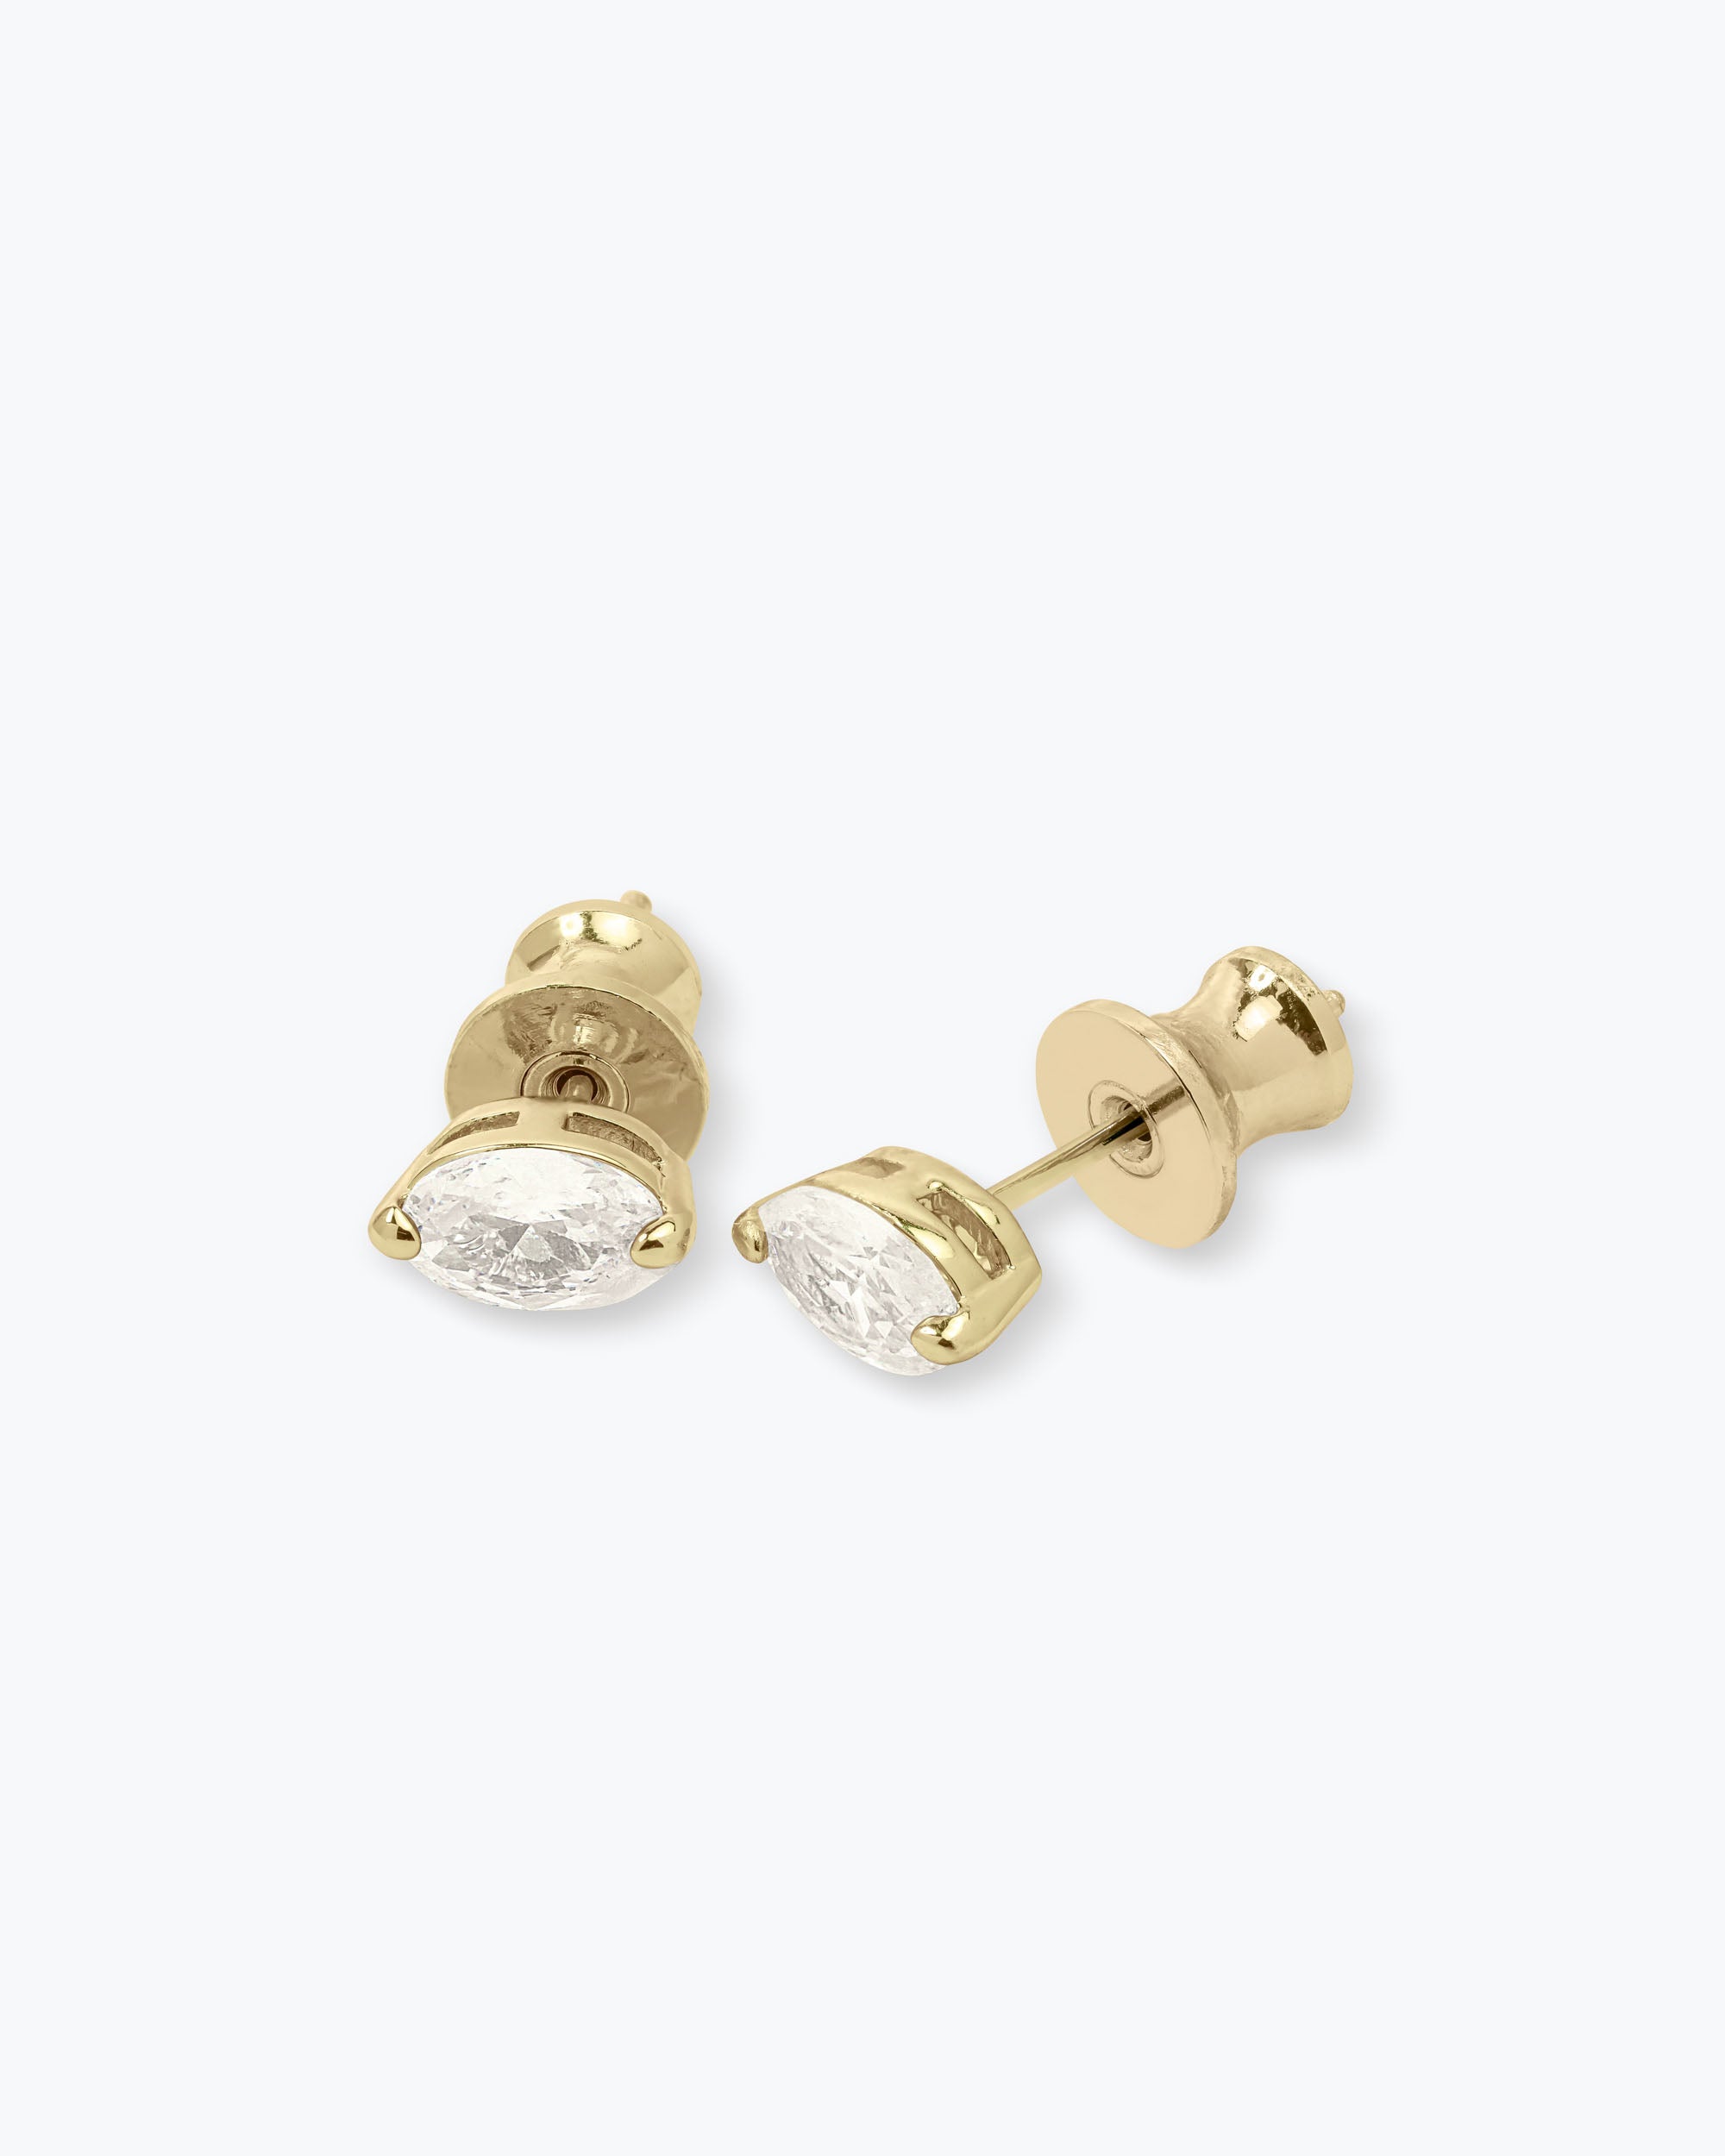 Baby She's So Fine Stud Earrings Gold and White Diamondettes